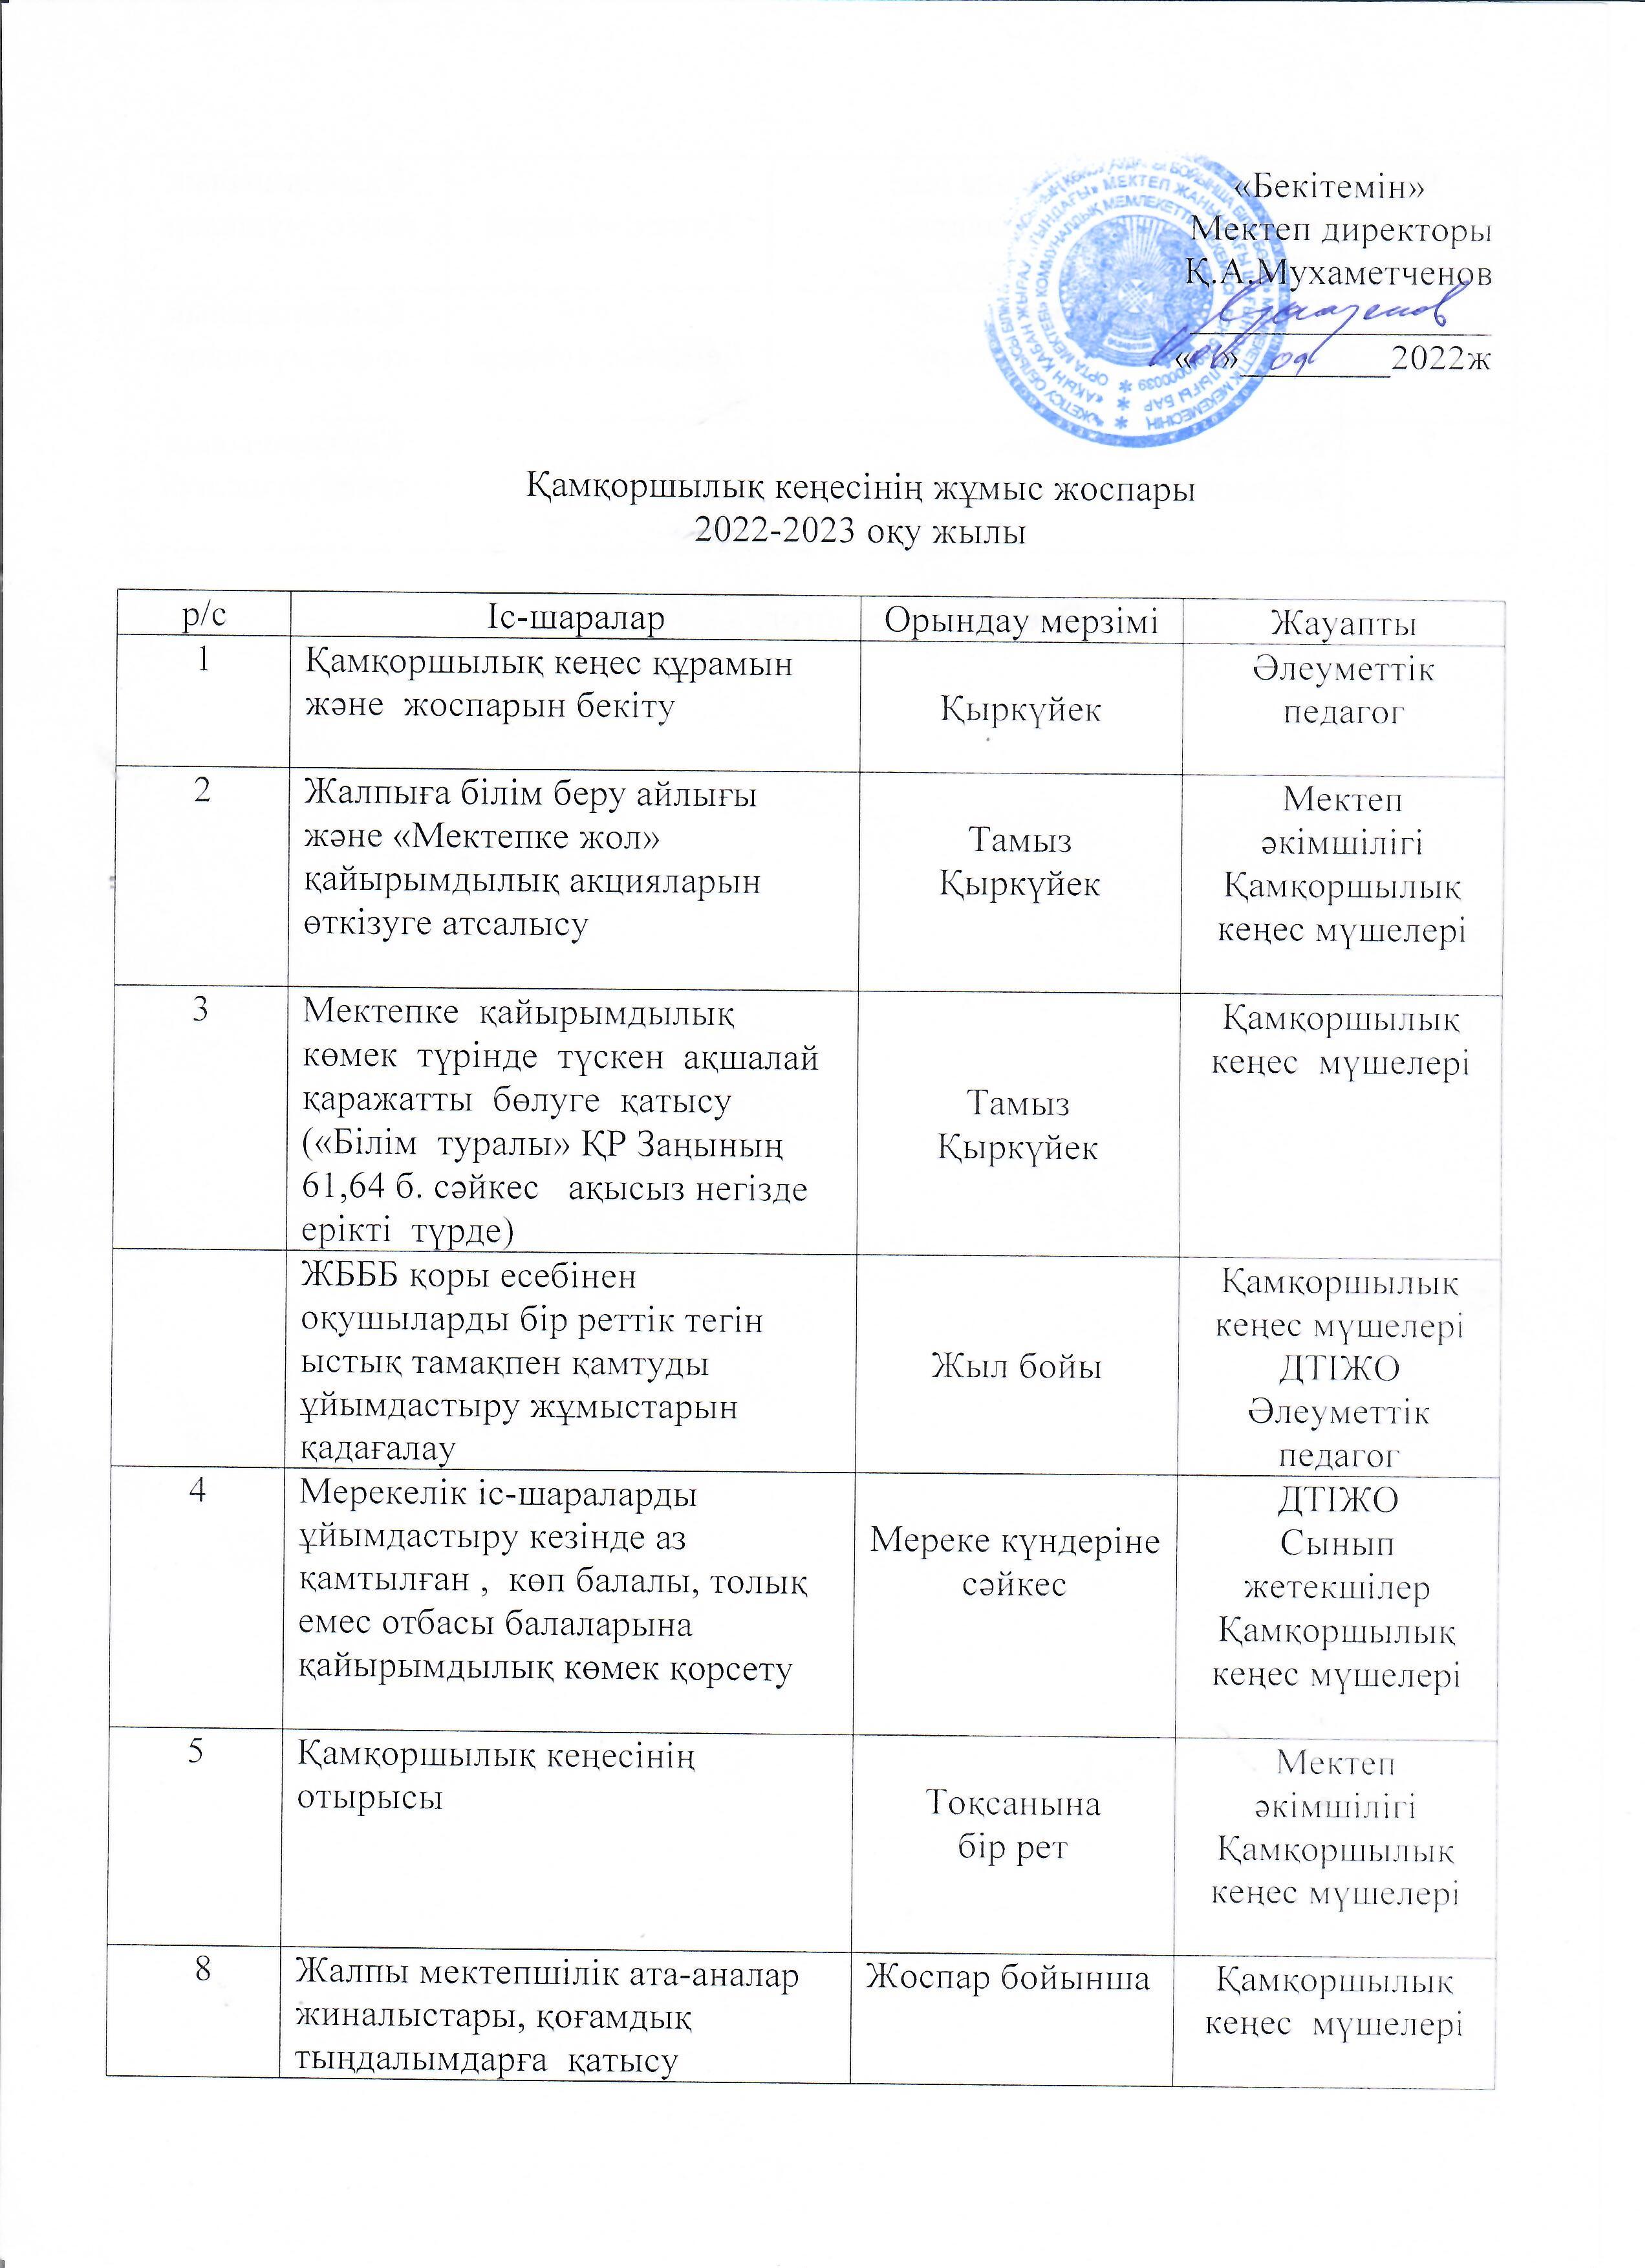 Board of Trustees жоспары